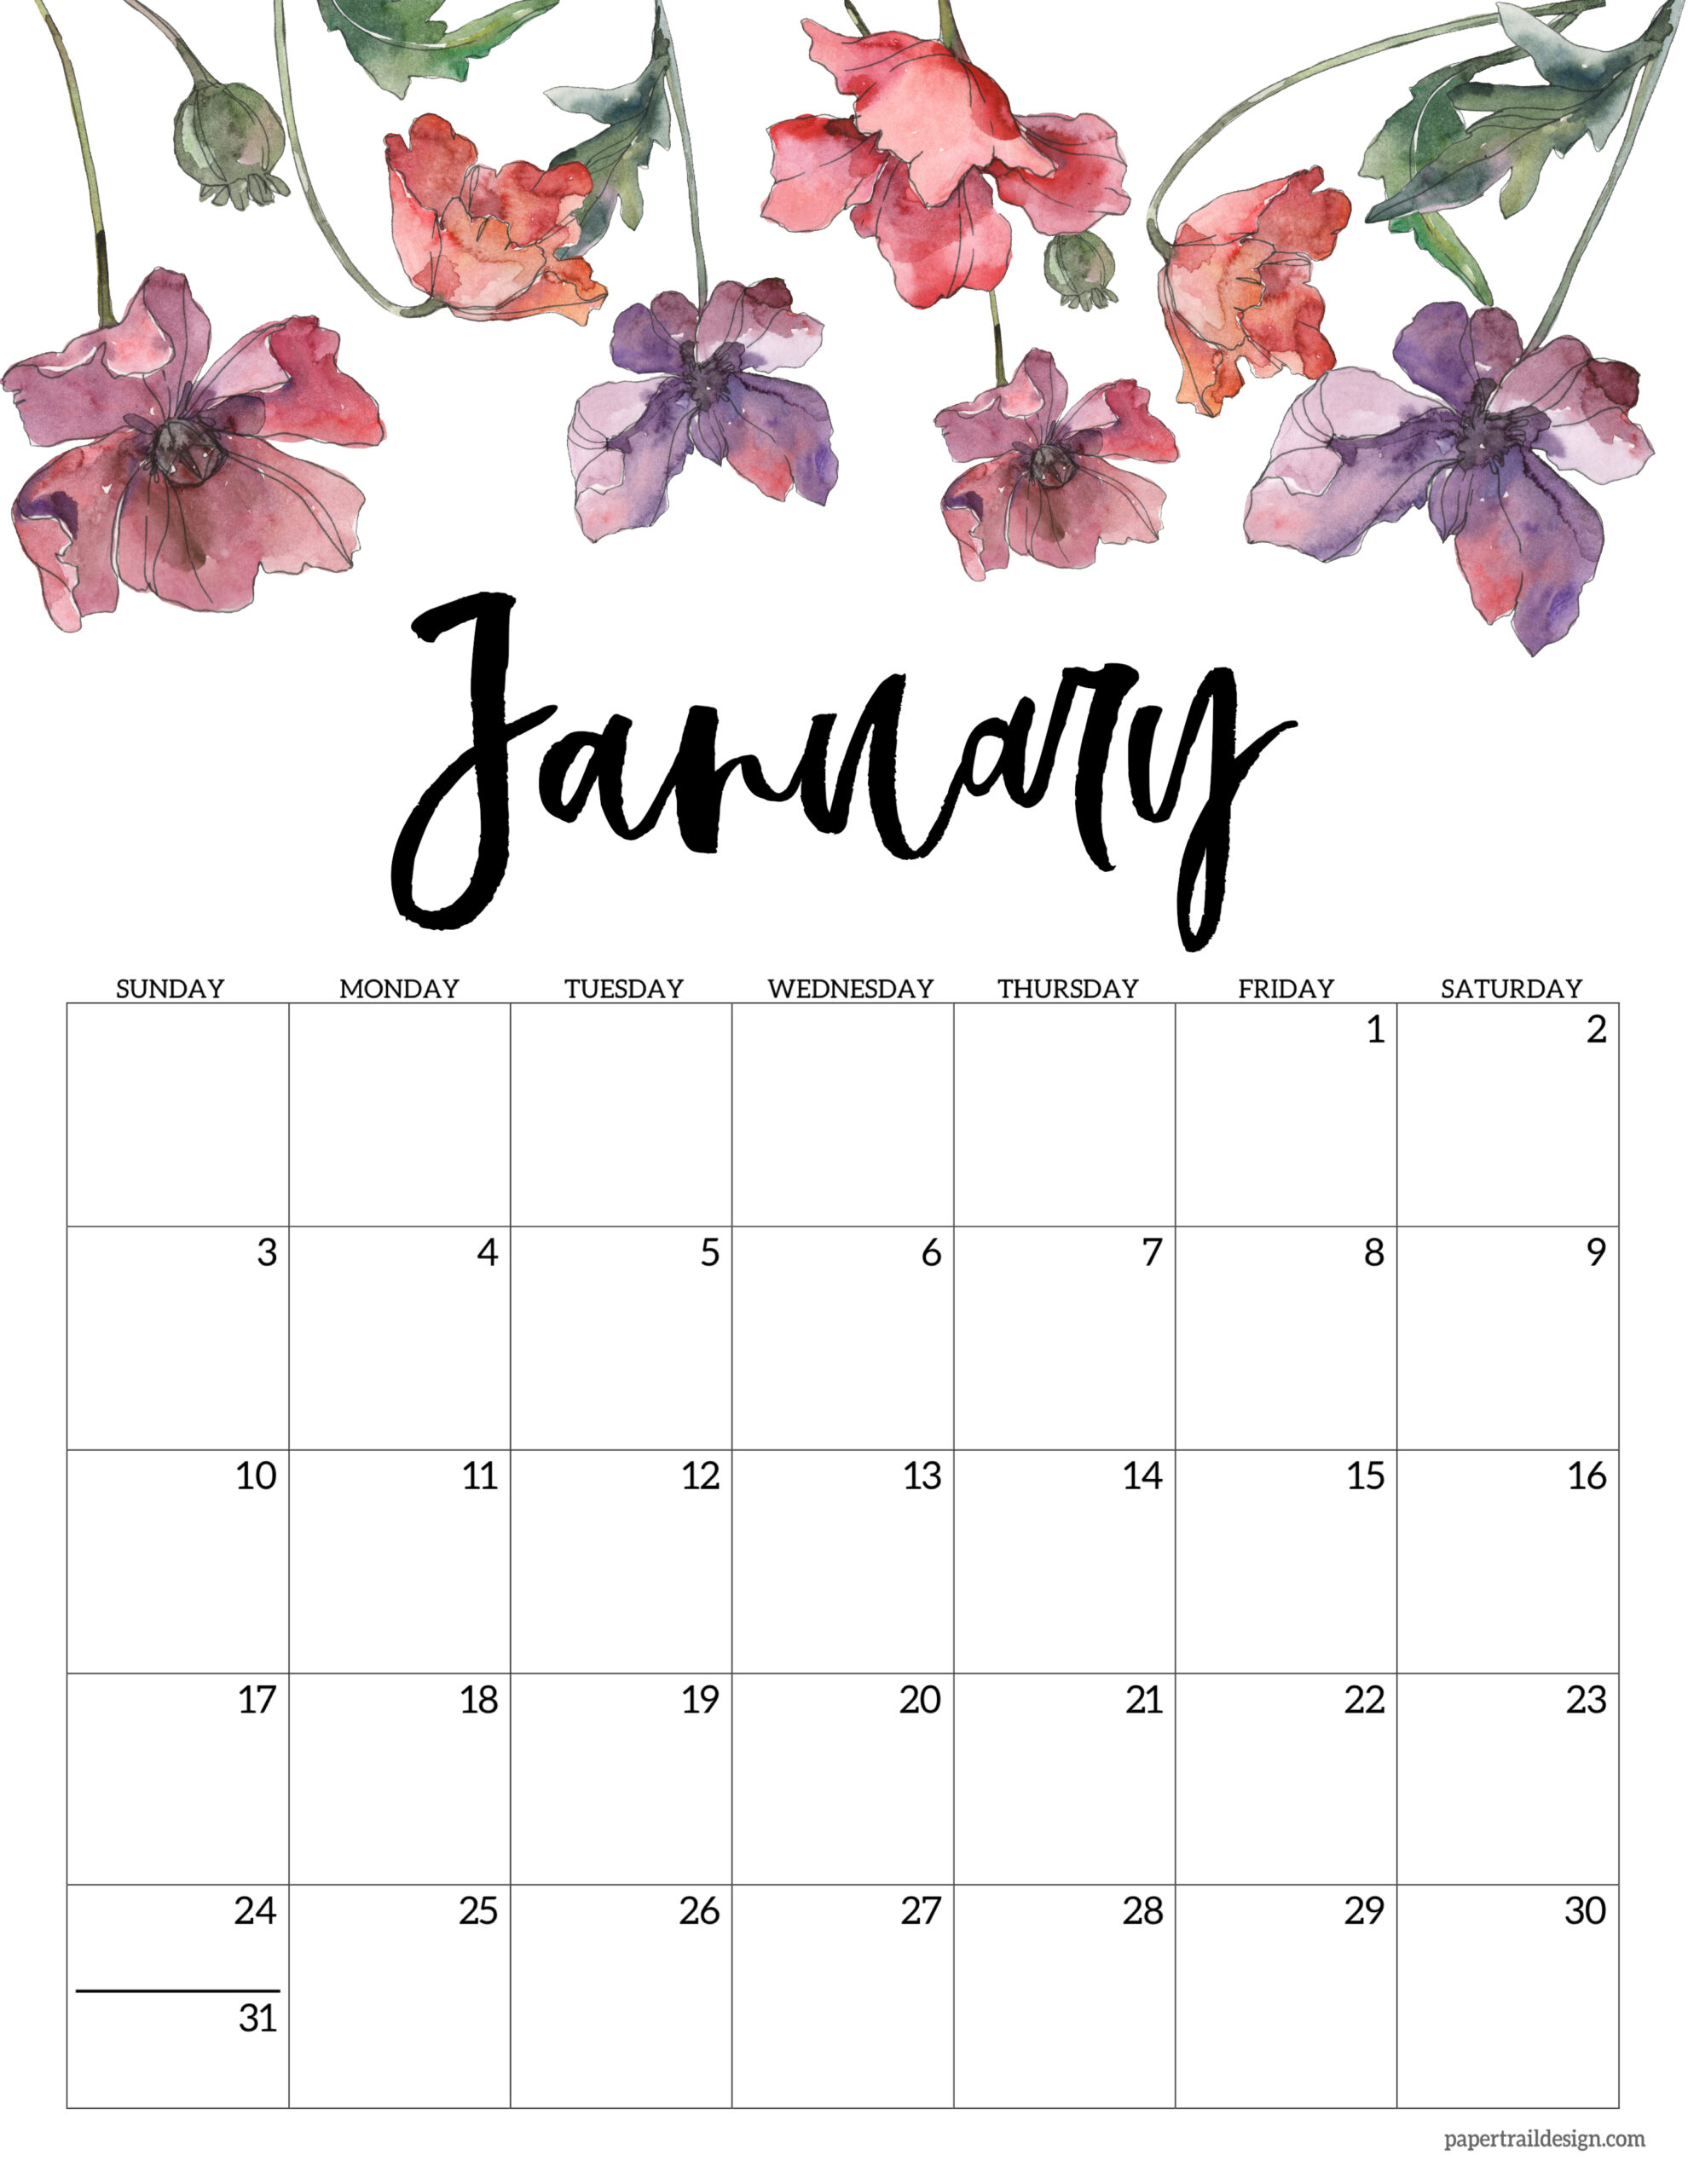 Featured image of post February 2021 Calendar Printable Floral : To download this free printable 2021 floral calendar, just click on the black and white download button below.